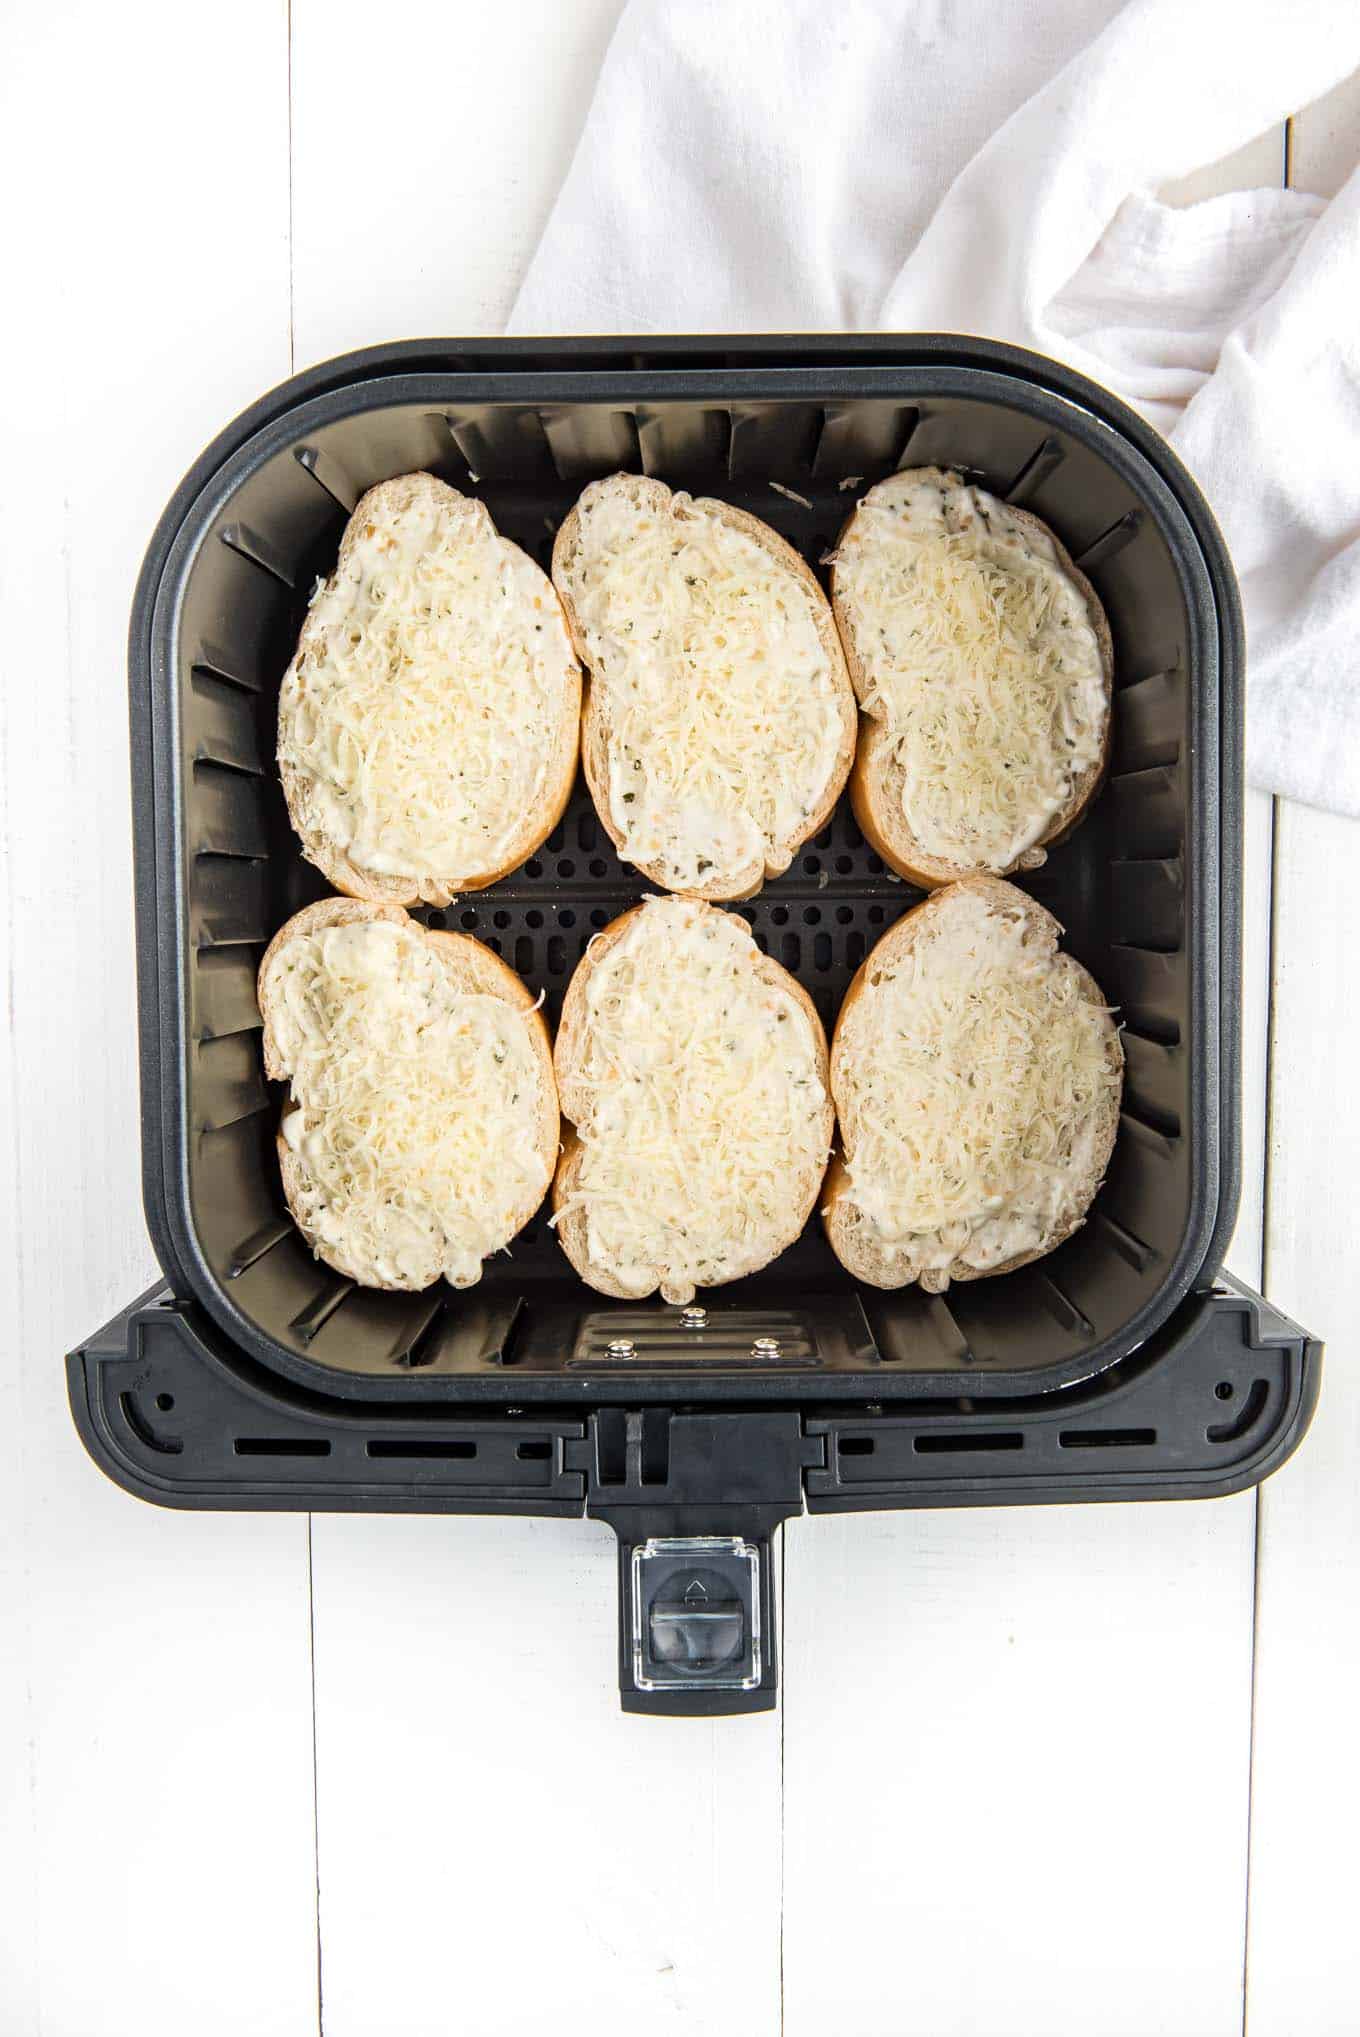 Pieces of french bread topped with butter and parmesan cheese in an air fryer basket.